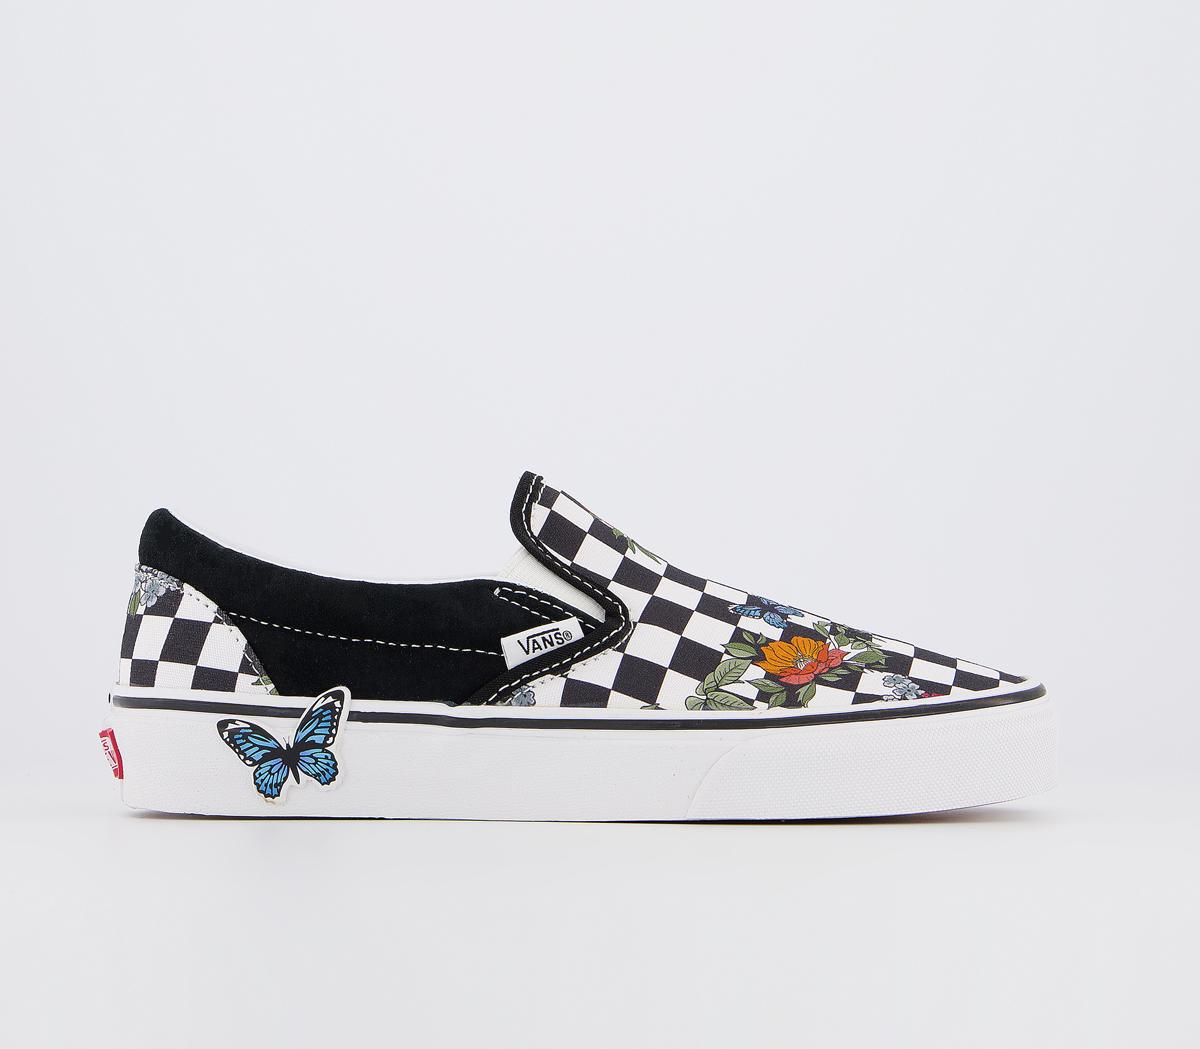 Classic Slip On Traines Black True White Floral Checkerboard - Hers